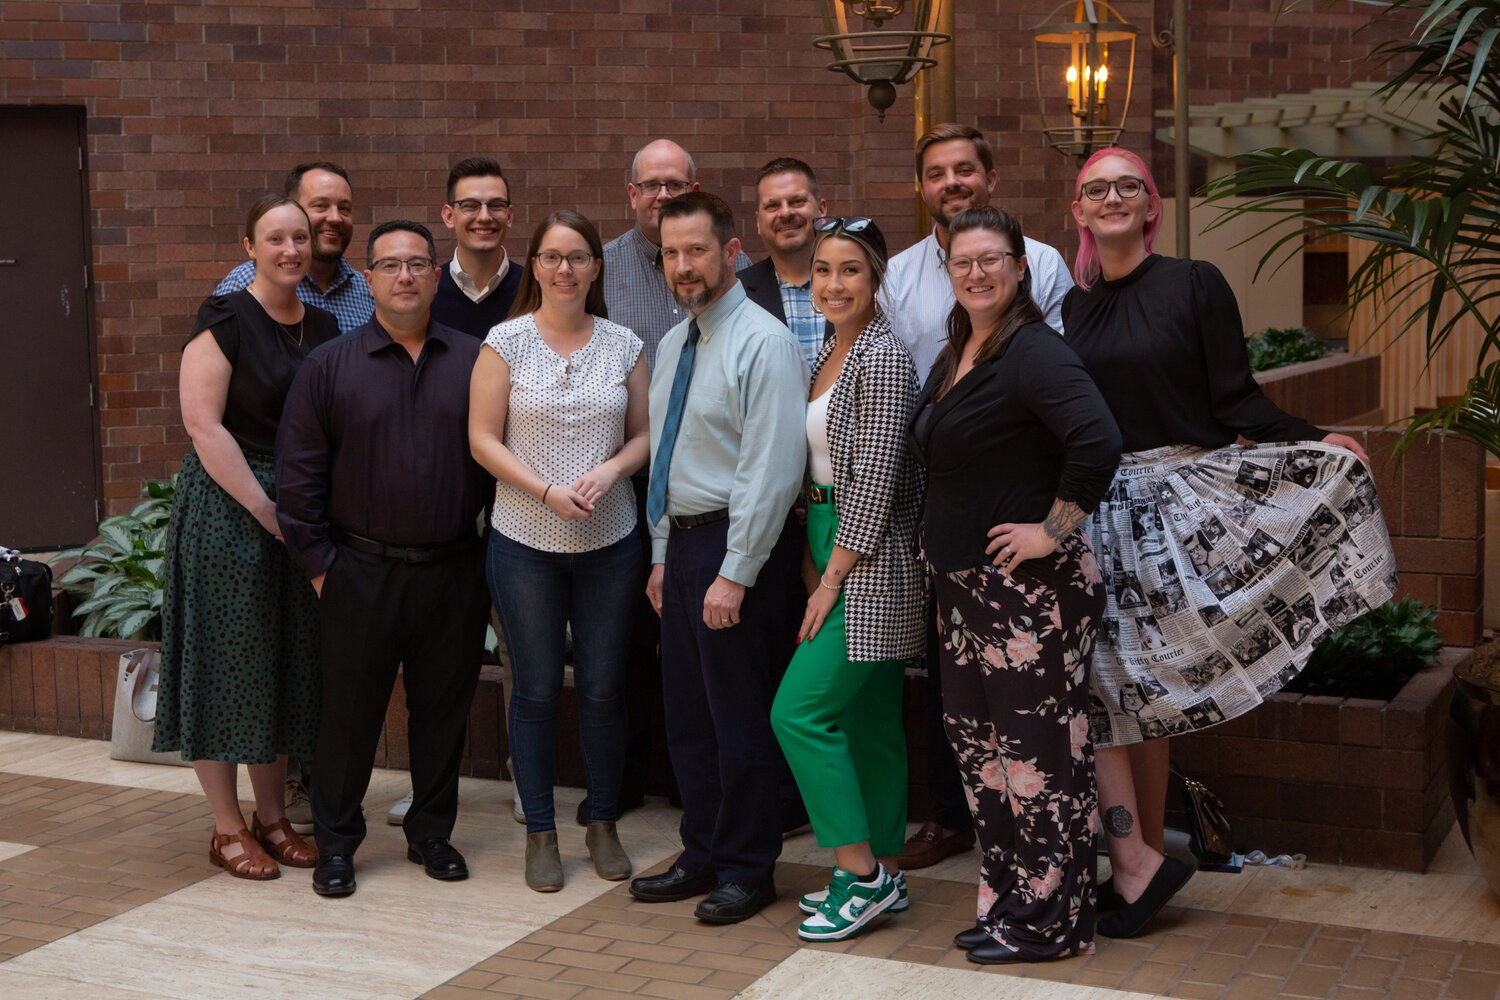 Executive Development Participants. (left to right) — Front row: Britni Tomcho, Todd Tanaka, Nicole Miller, Aaron Rother, Chantel Soranaka and Heather Kantrud. Back row: Nate Peterson, Ben Childers, Jeremy Cooley, Chris Brumfield, Hugh Osteen and Alycia McCloud.